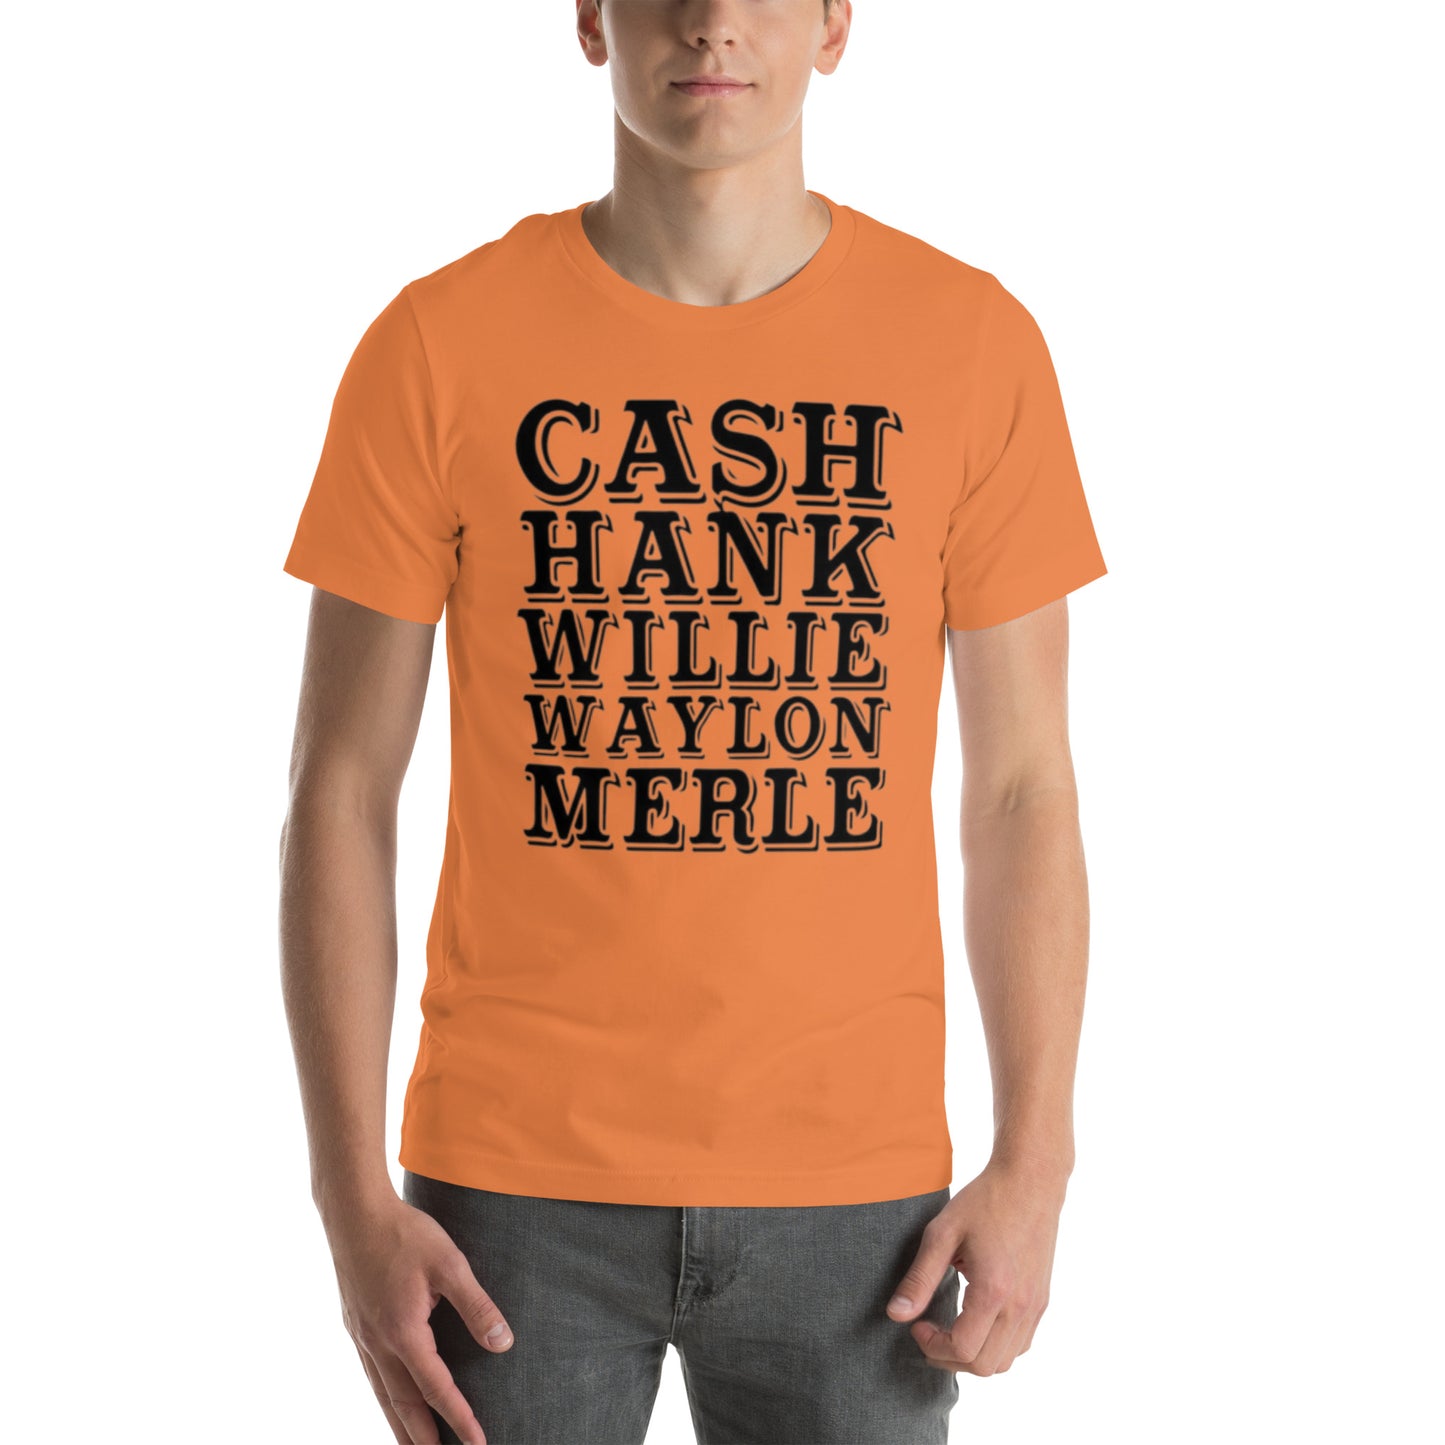 Cash Hank - Get Your Twang On with Classic Country Tees - The Ultimate Unisex T-Shirt for True Country Souls! - Classic Country Tees